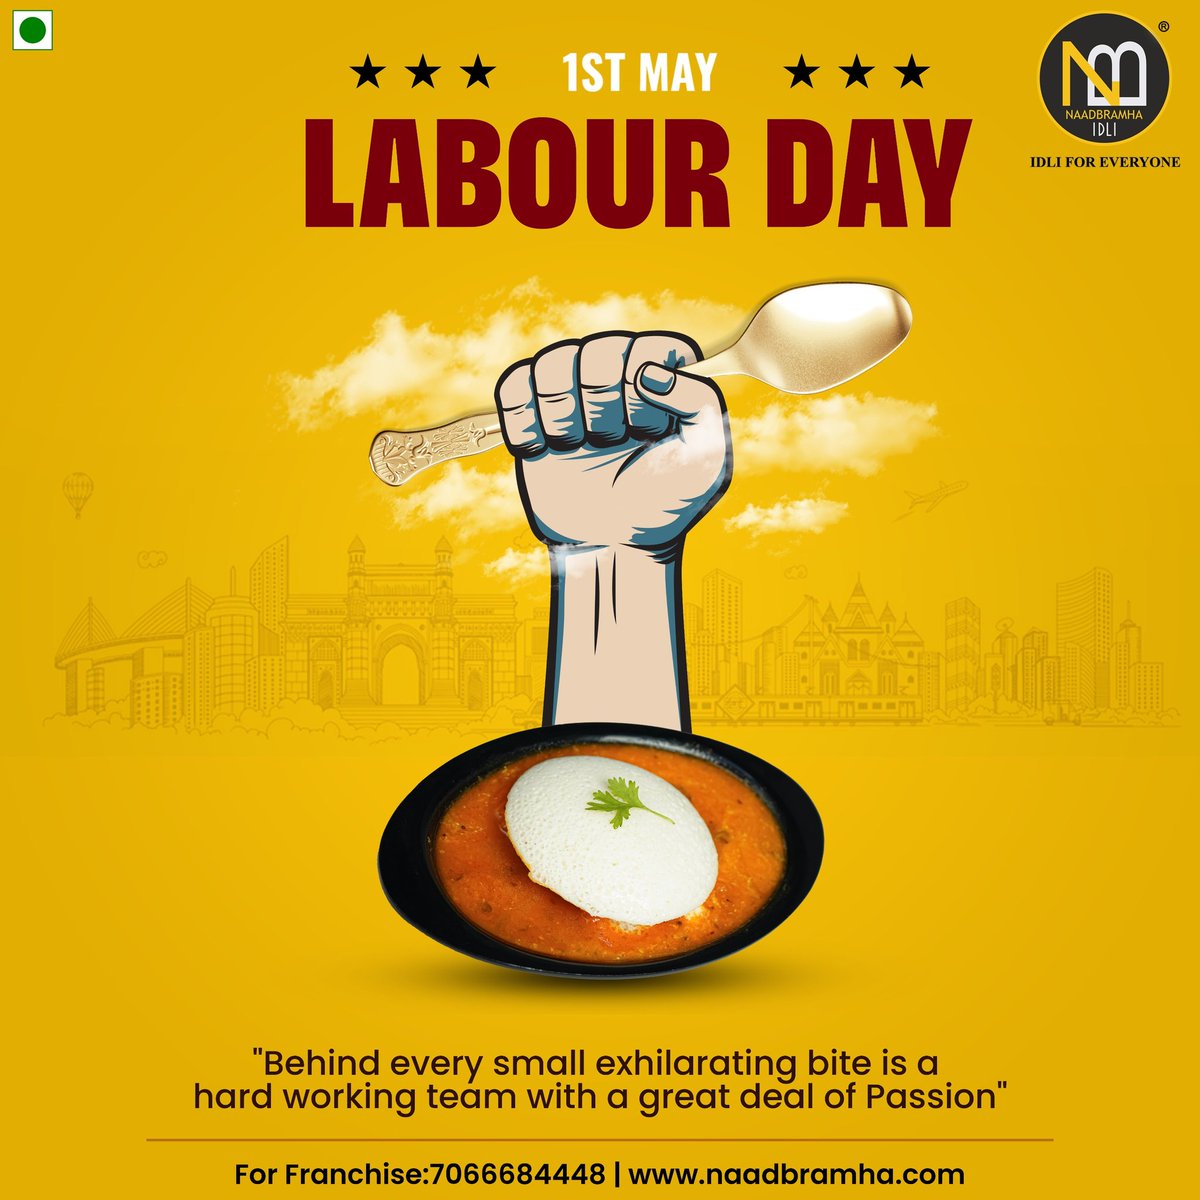 Happy Labour Day 😇 from Naadbramhaidli Here's to all the hard work and dedication that make great things happen #naadbramhaidli #Labourday #Labours #happylabourday #worldlabourday #1stmay